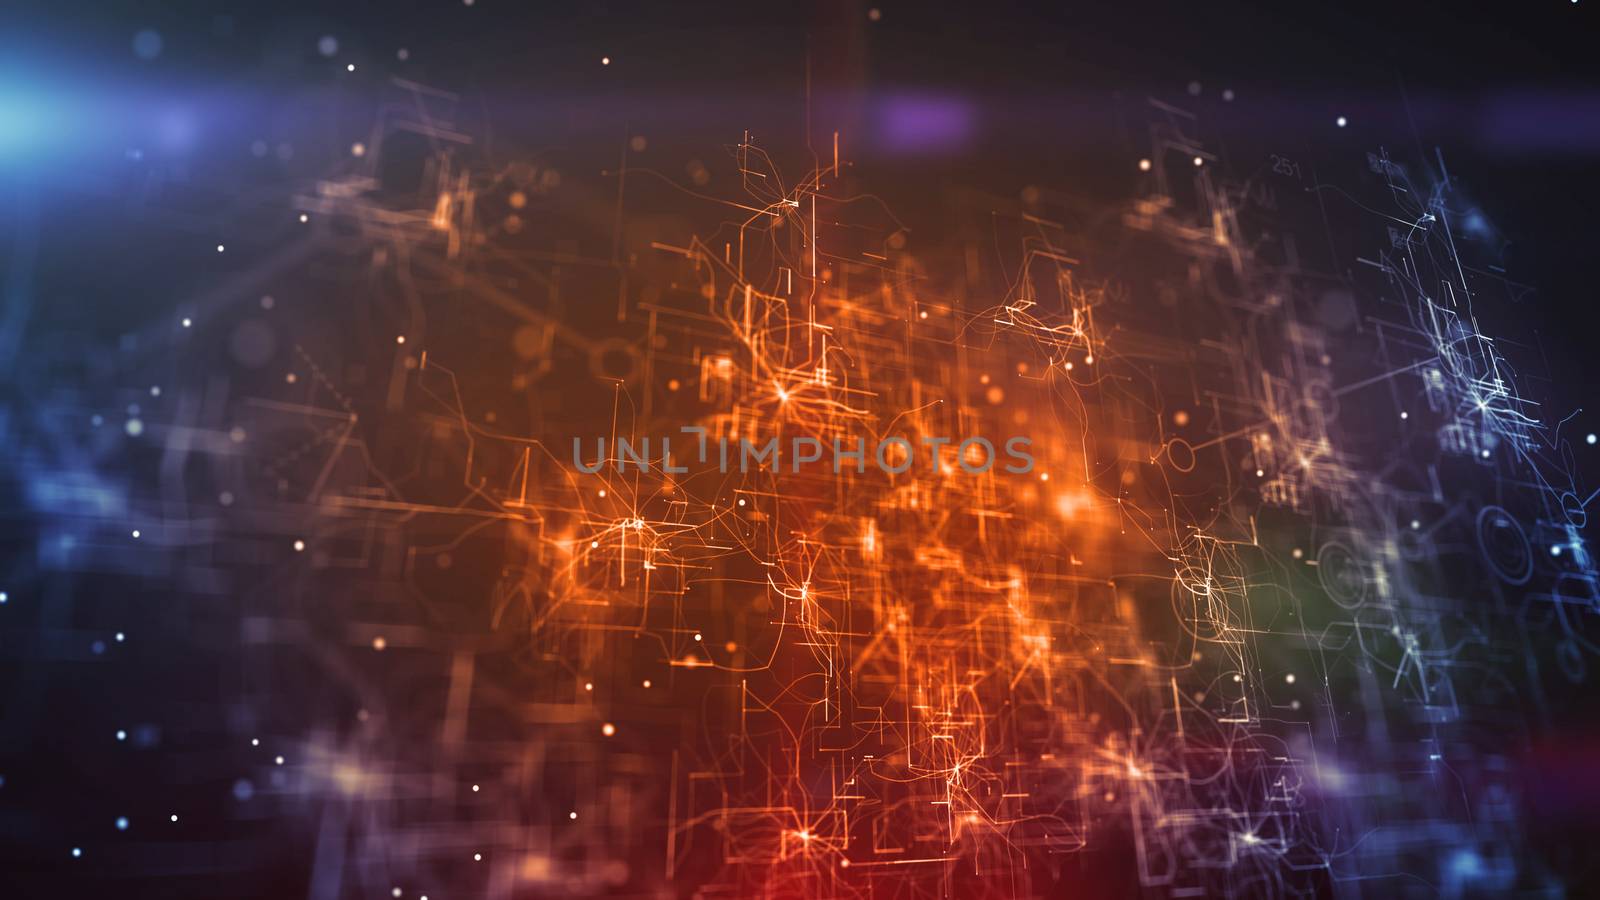 Splendid 3d illustration of a cyberspace cpu shining brightly in the golden and blue background. It has a network of interconnected crisscross and straight lines.